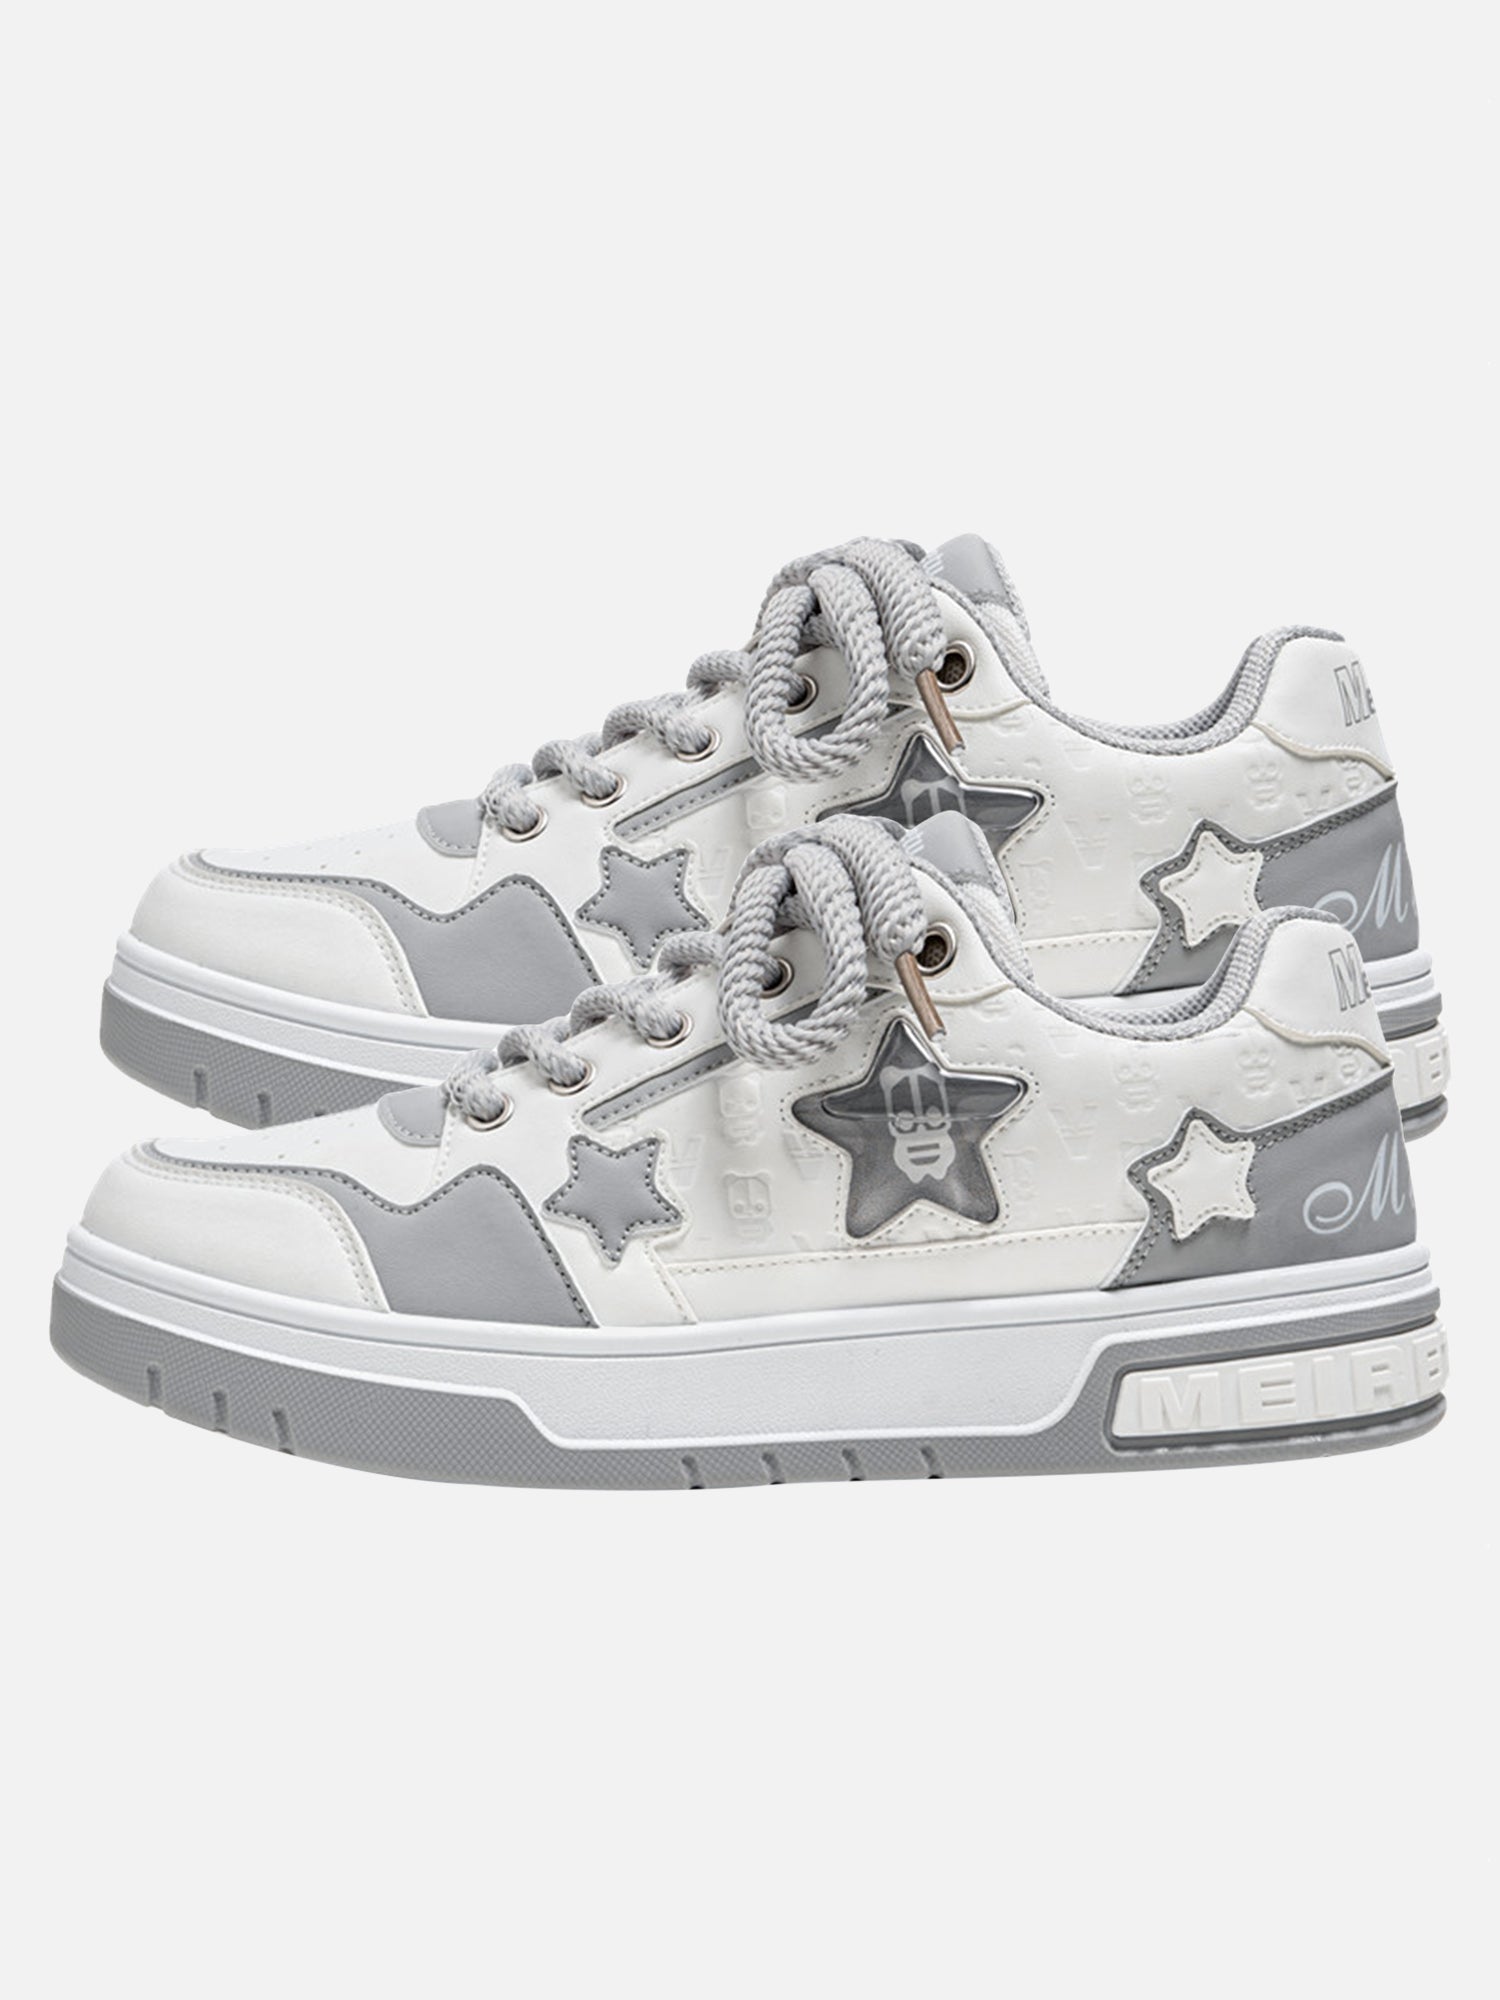 Star Thick Bottom Couple Retro Casual Hip Hop Street Sneakers